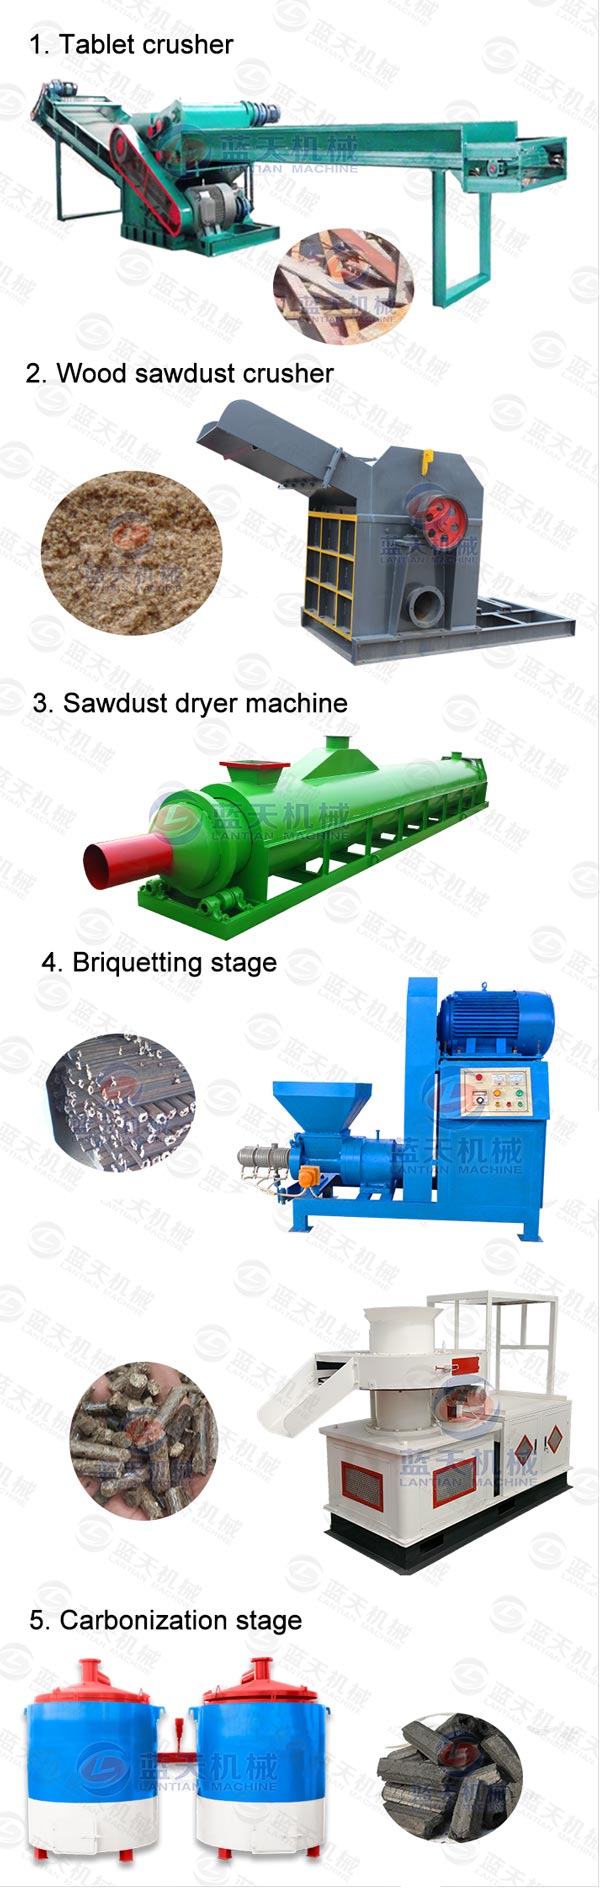 Product Line of Tablet Crusher